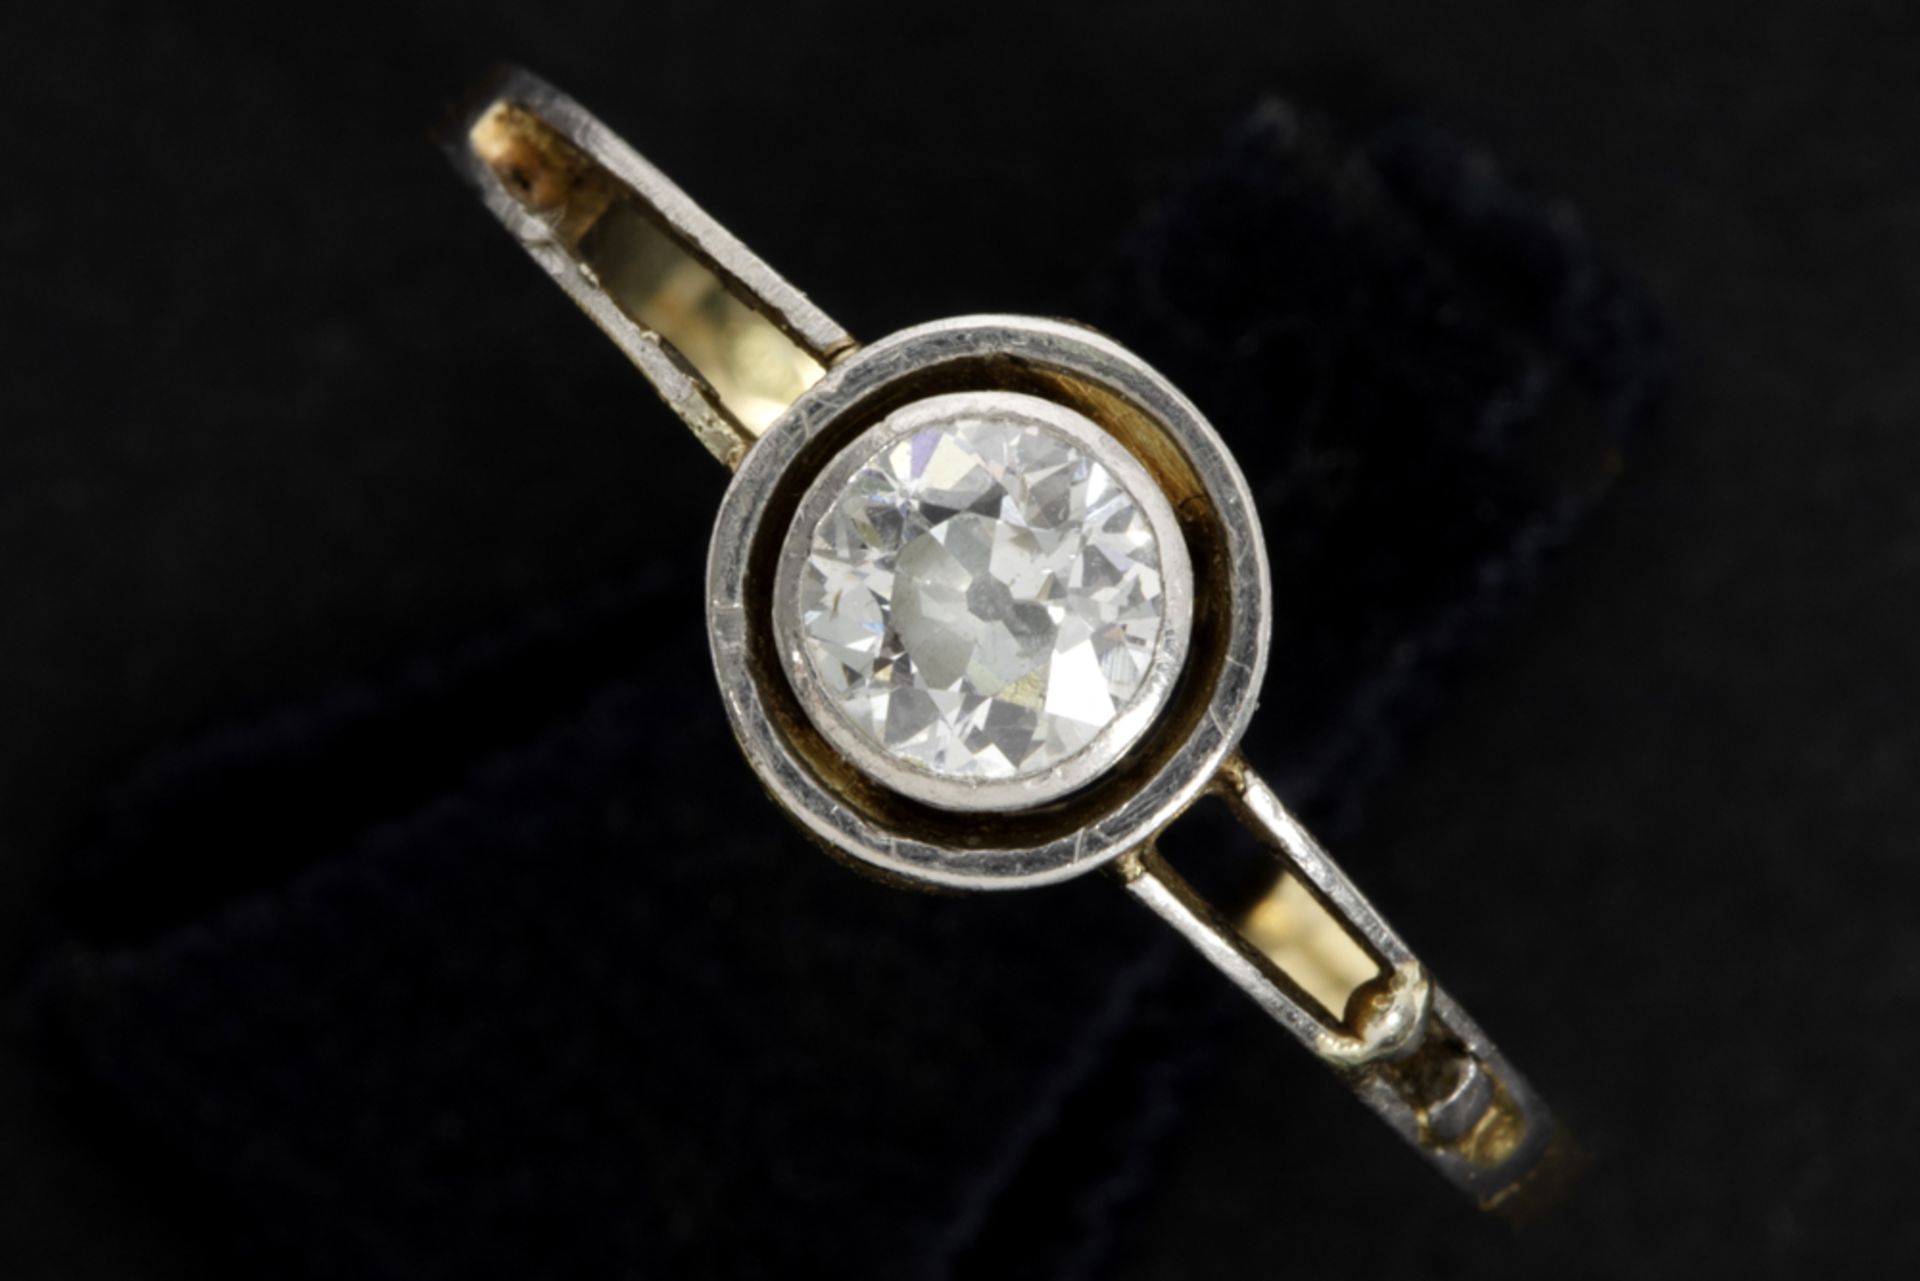 a ca 0,30 carat high quality old brilliant cut diamond set in a ring in yellow gold (18 carat) ||